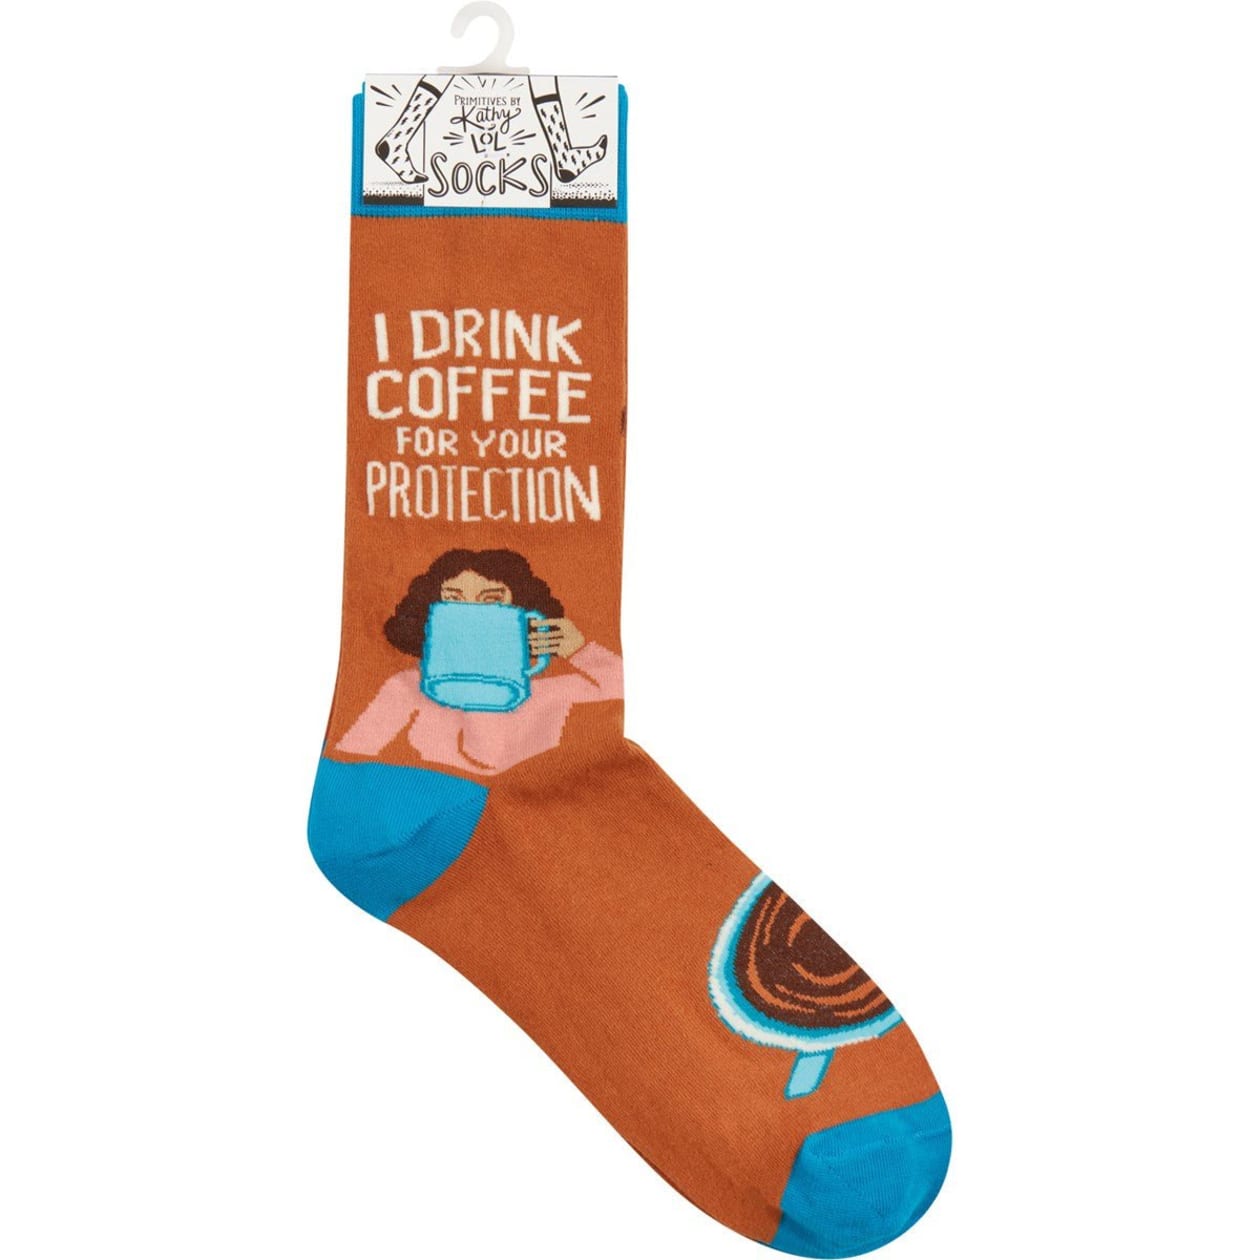 I Drink Coffee For Your Protection Funny Socks in Aqua Blue and Brown | Unisex